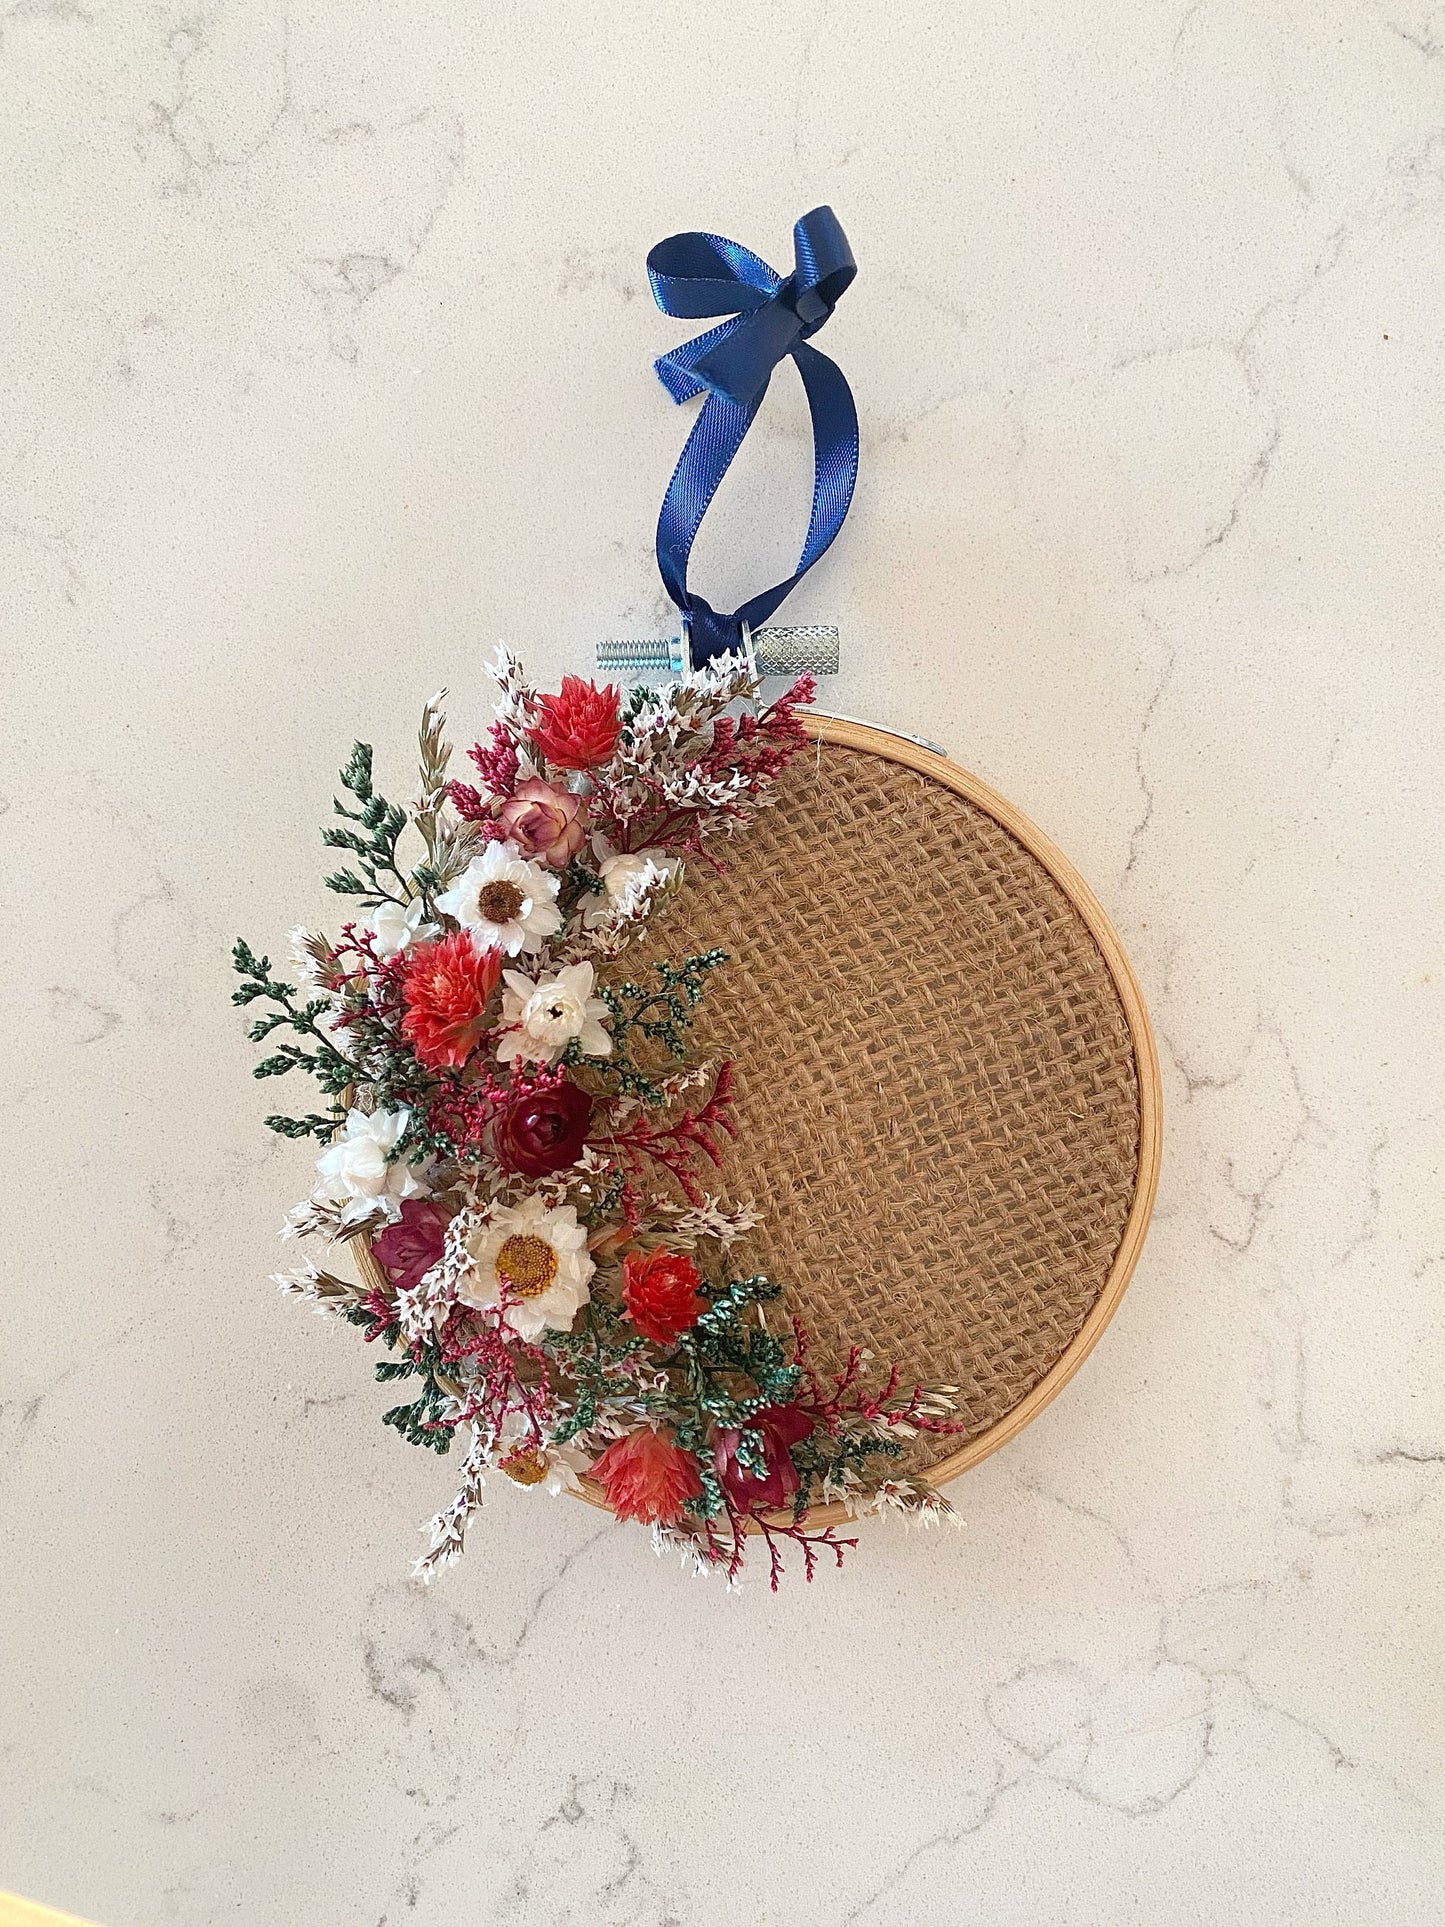 Floral Wreath Ornaments, Holiday Gifts, Christmas Tree, Room Decor, Dried Flowers, Preserved, Colorful, Natural